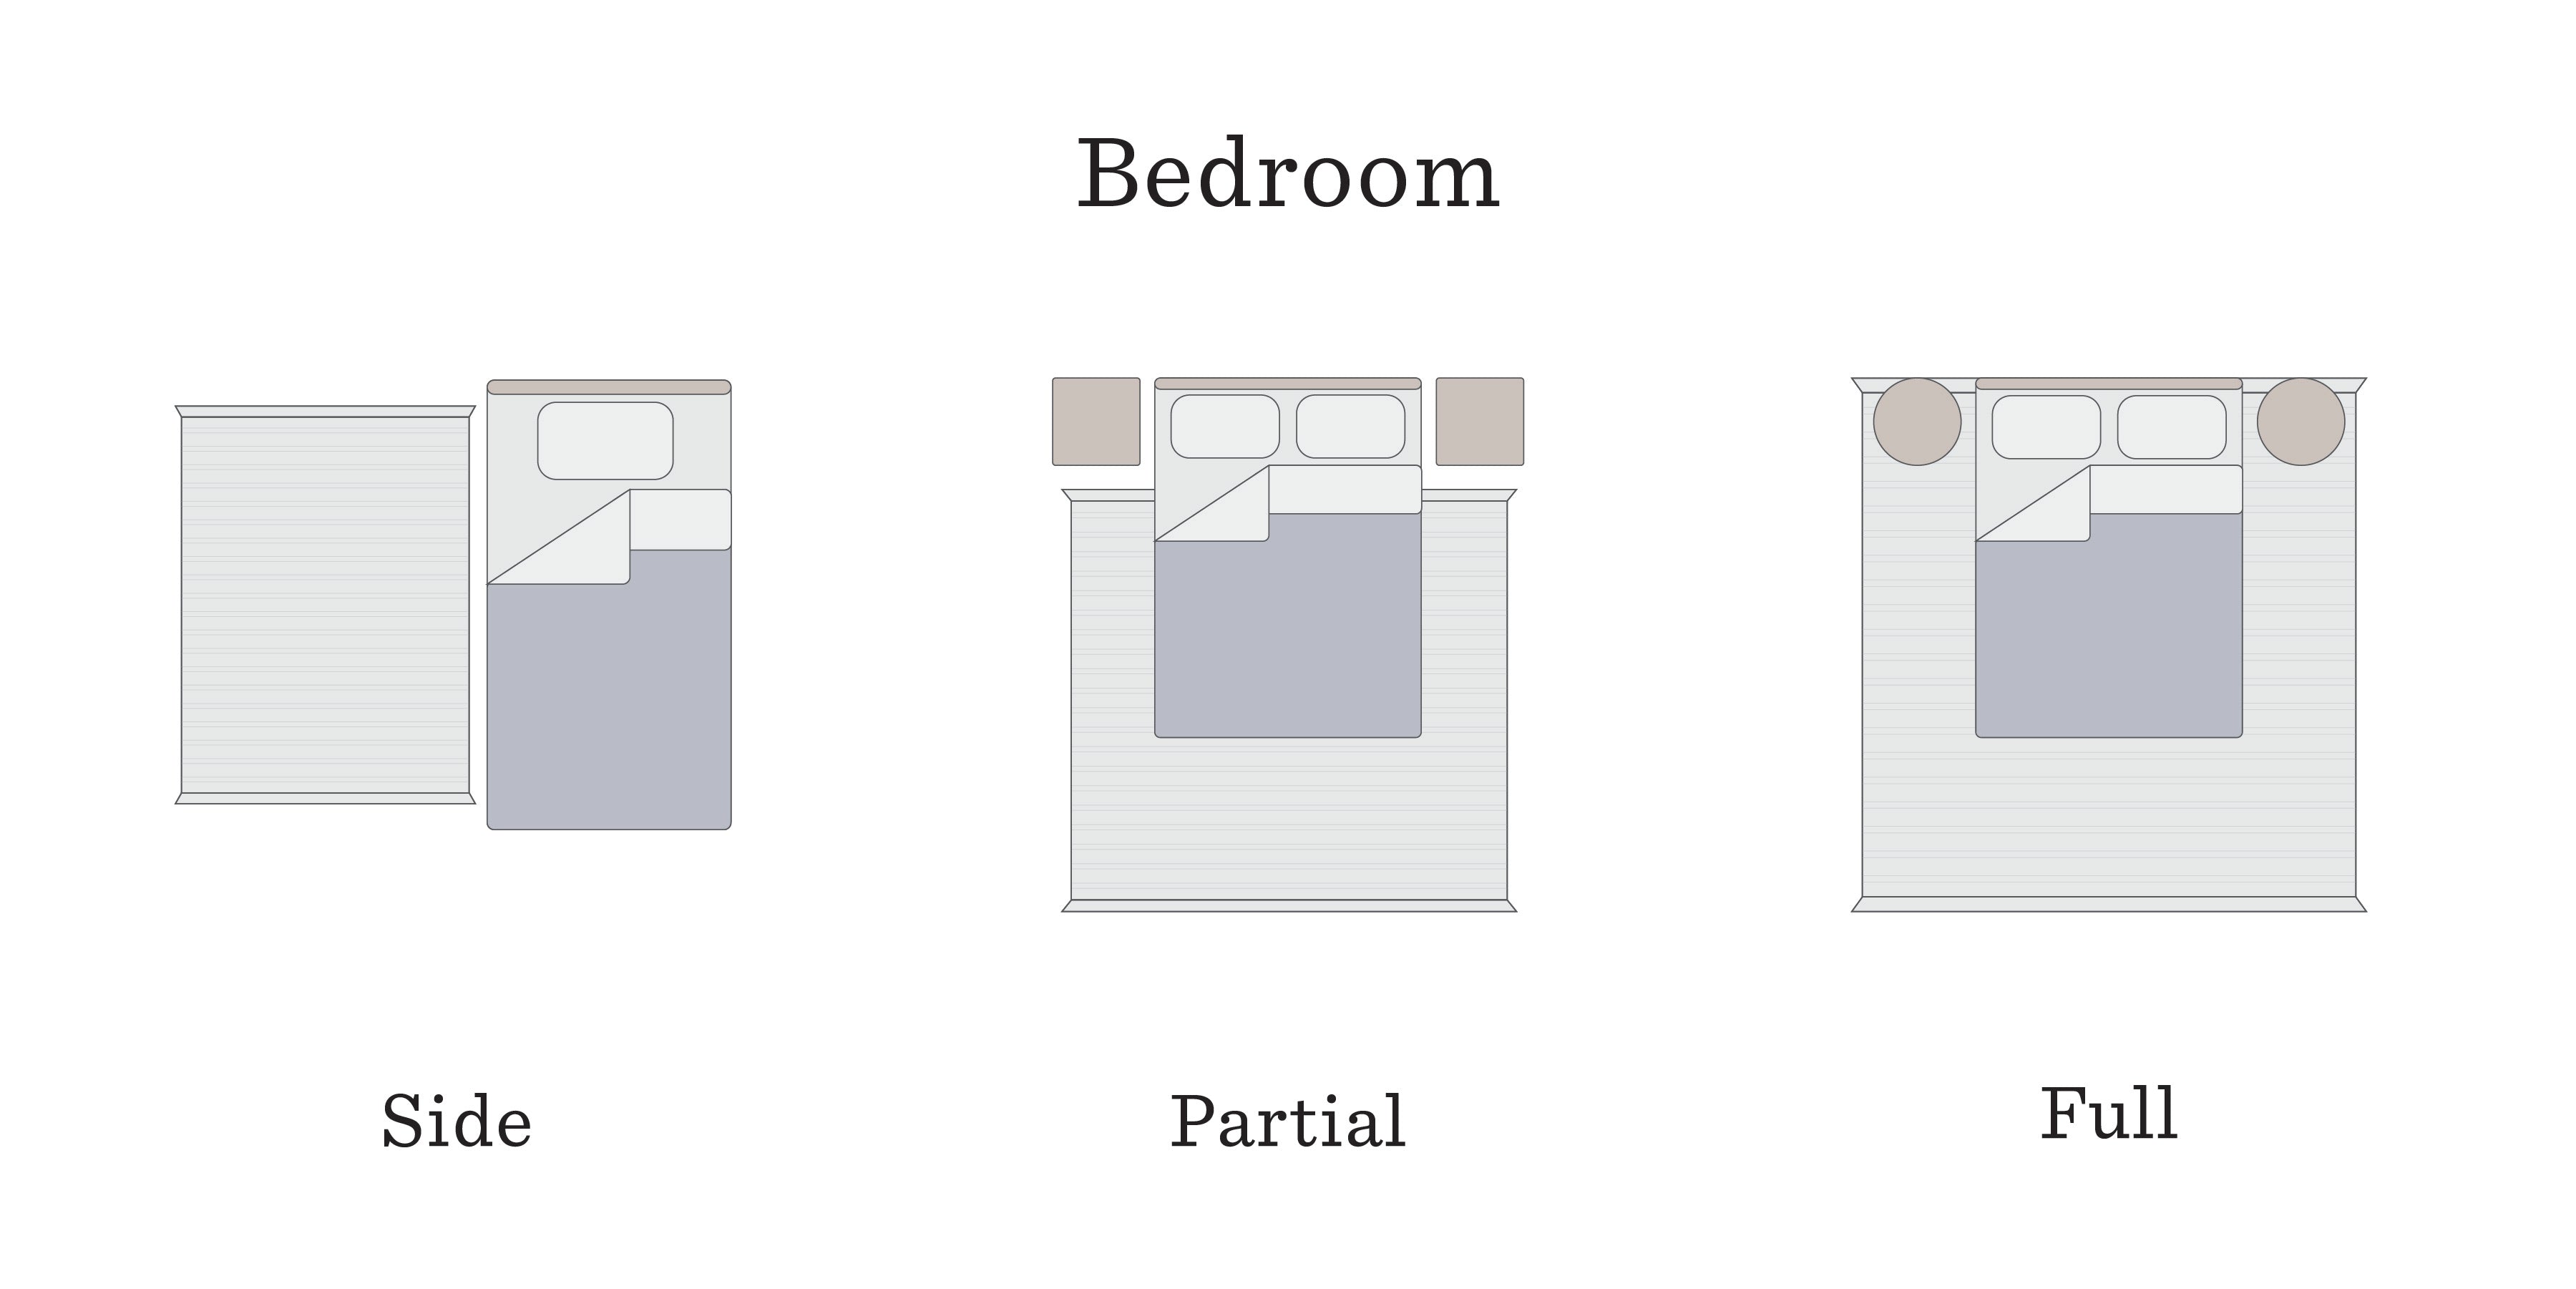 Rug layout options for bedroom with twin, full, queen, or king beds